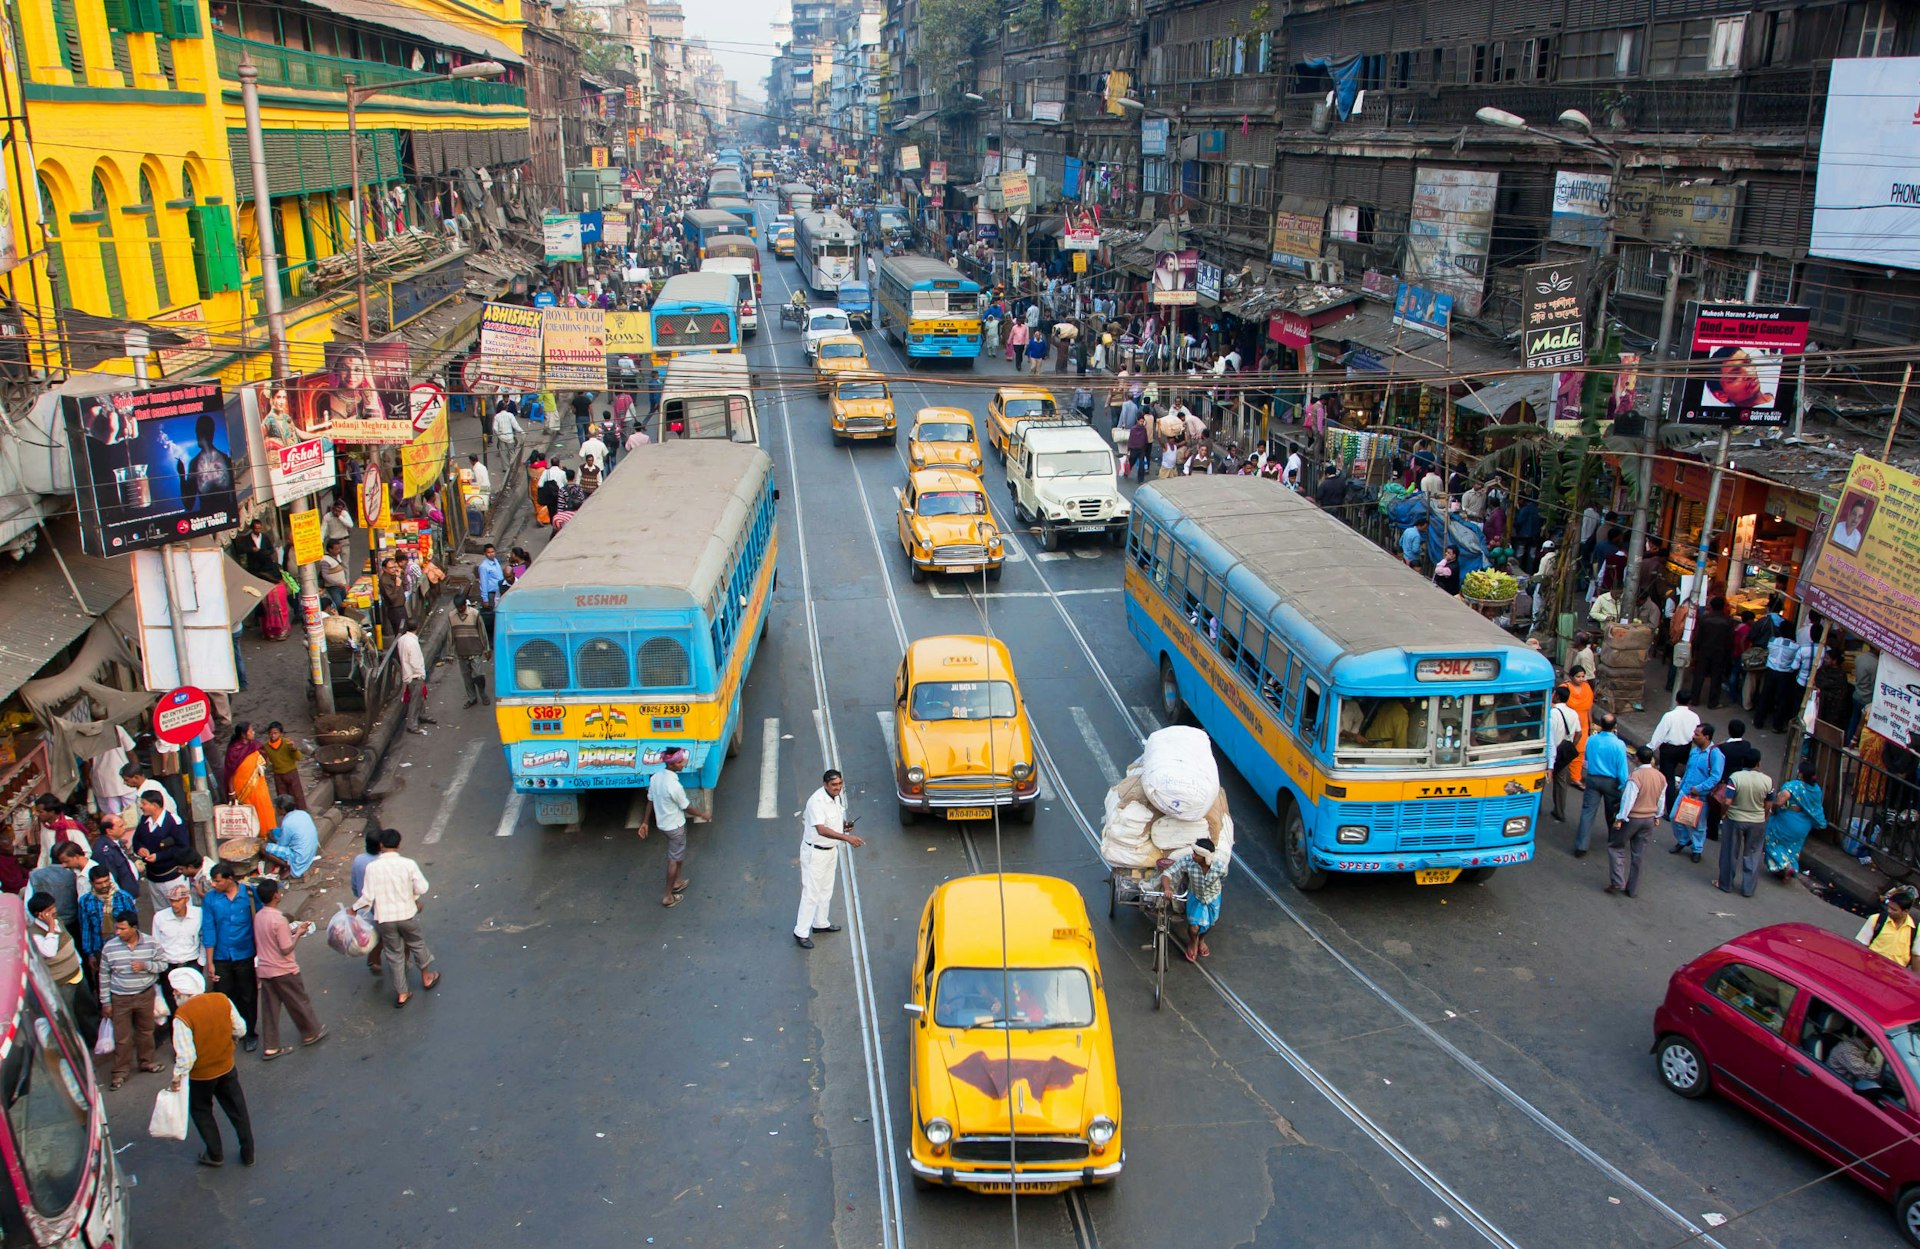 Buses, taxis, rickshaws and trams jostle for space in Kolkata's bustling streets © Radiokukka / Getty Images